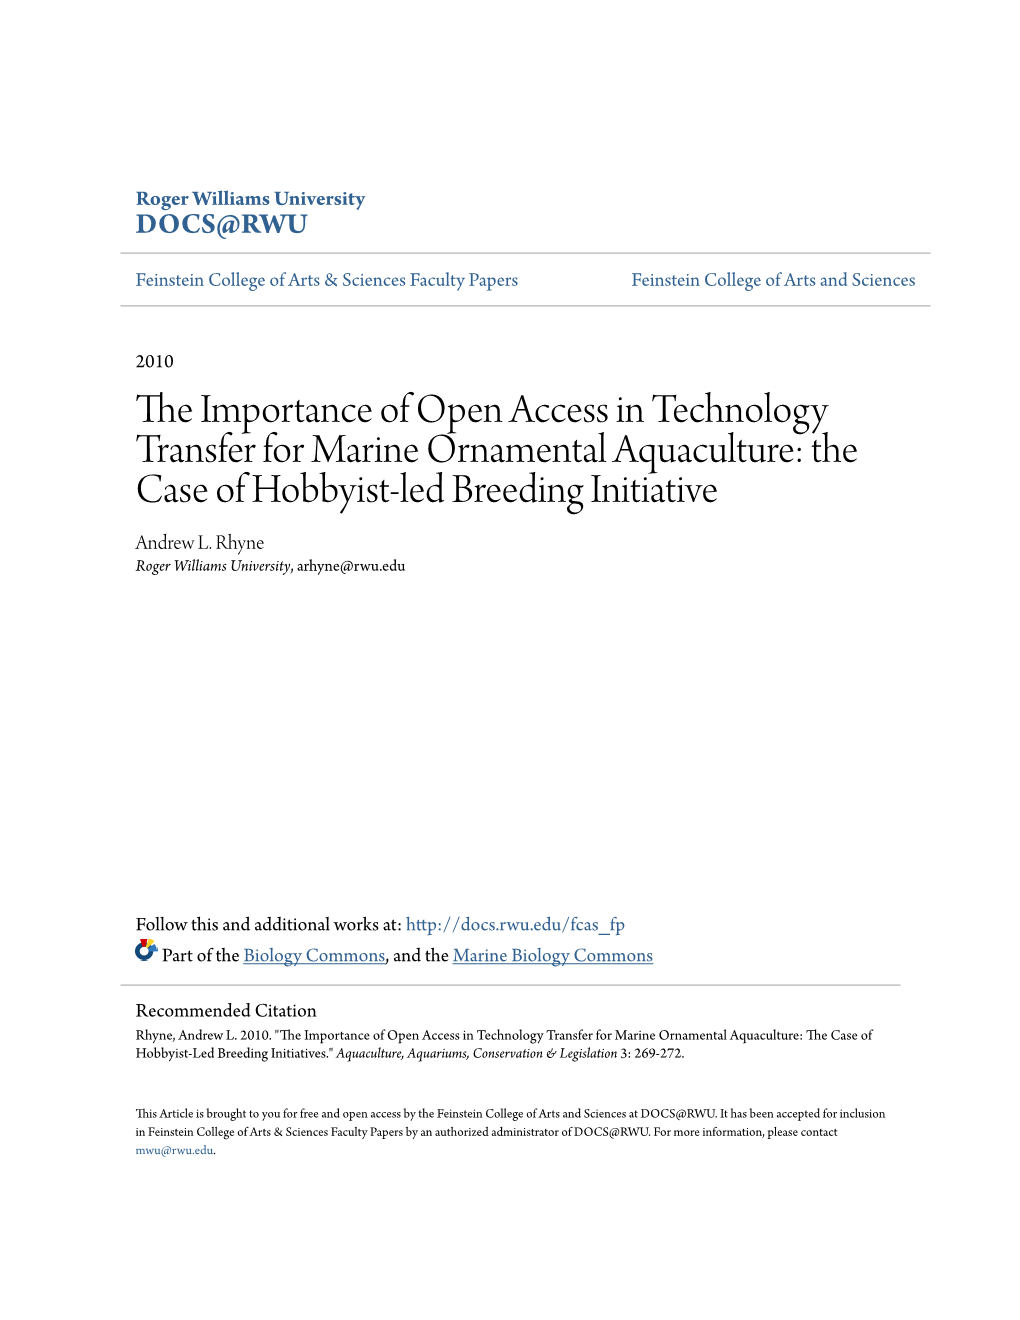 The Importance of Open Access in Technology Transfer for Marine Ornamental Aquaculture: the Case of Hobbyist-Led Breeding Initiatives 1,2Andrew L